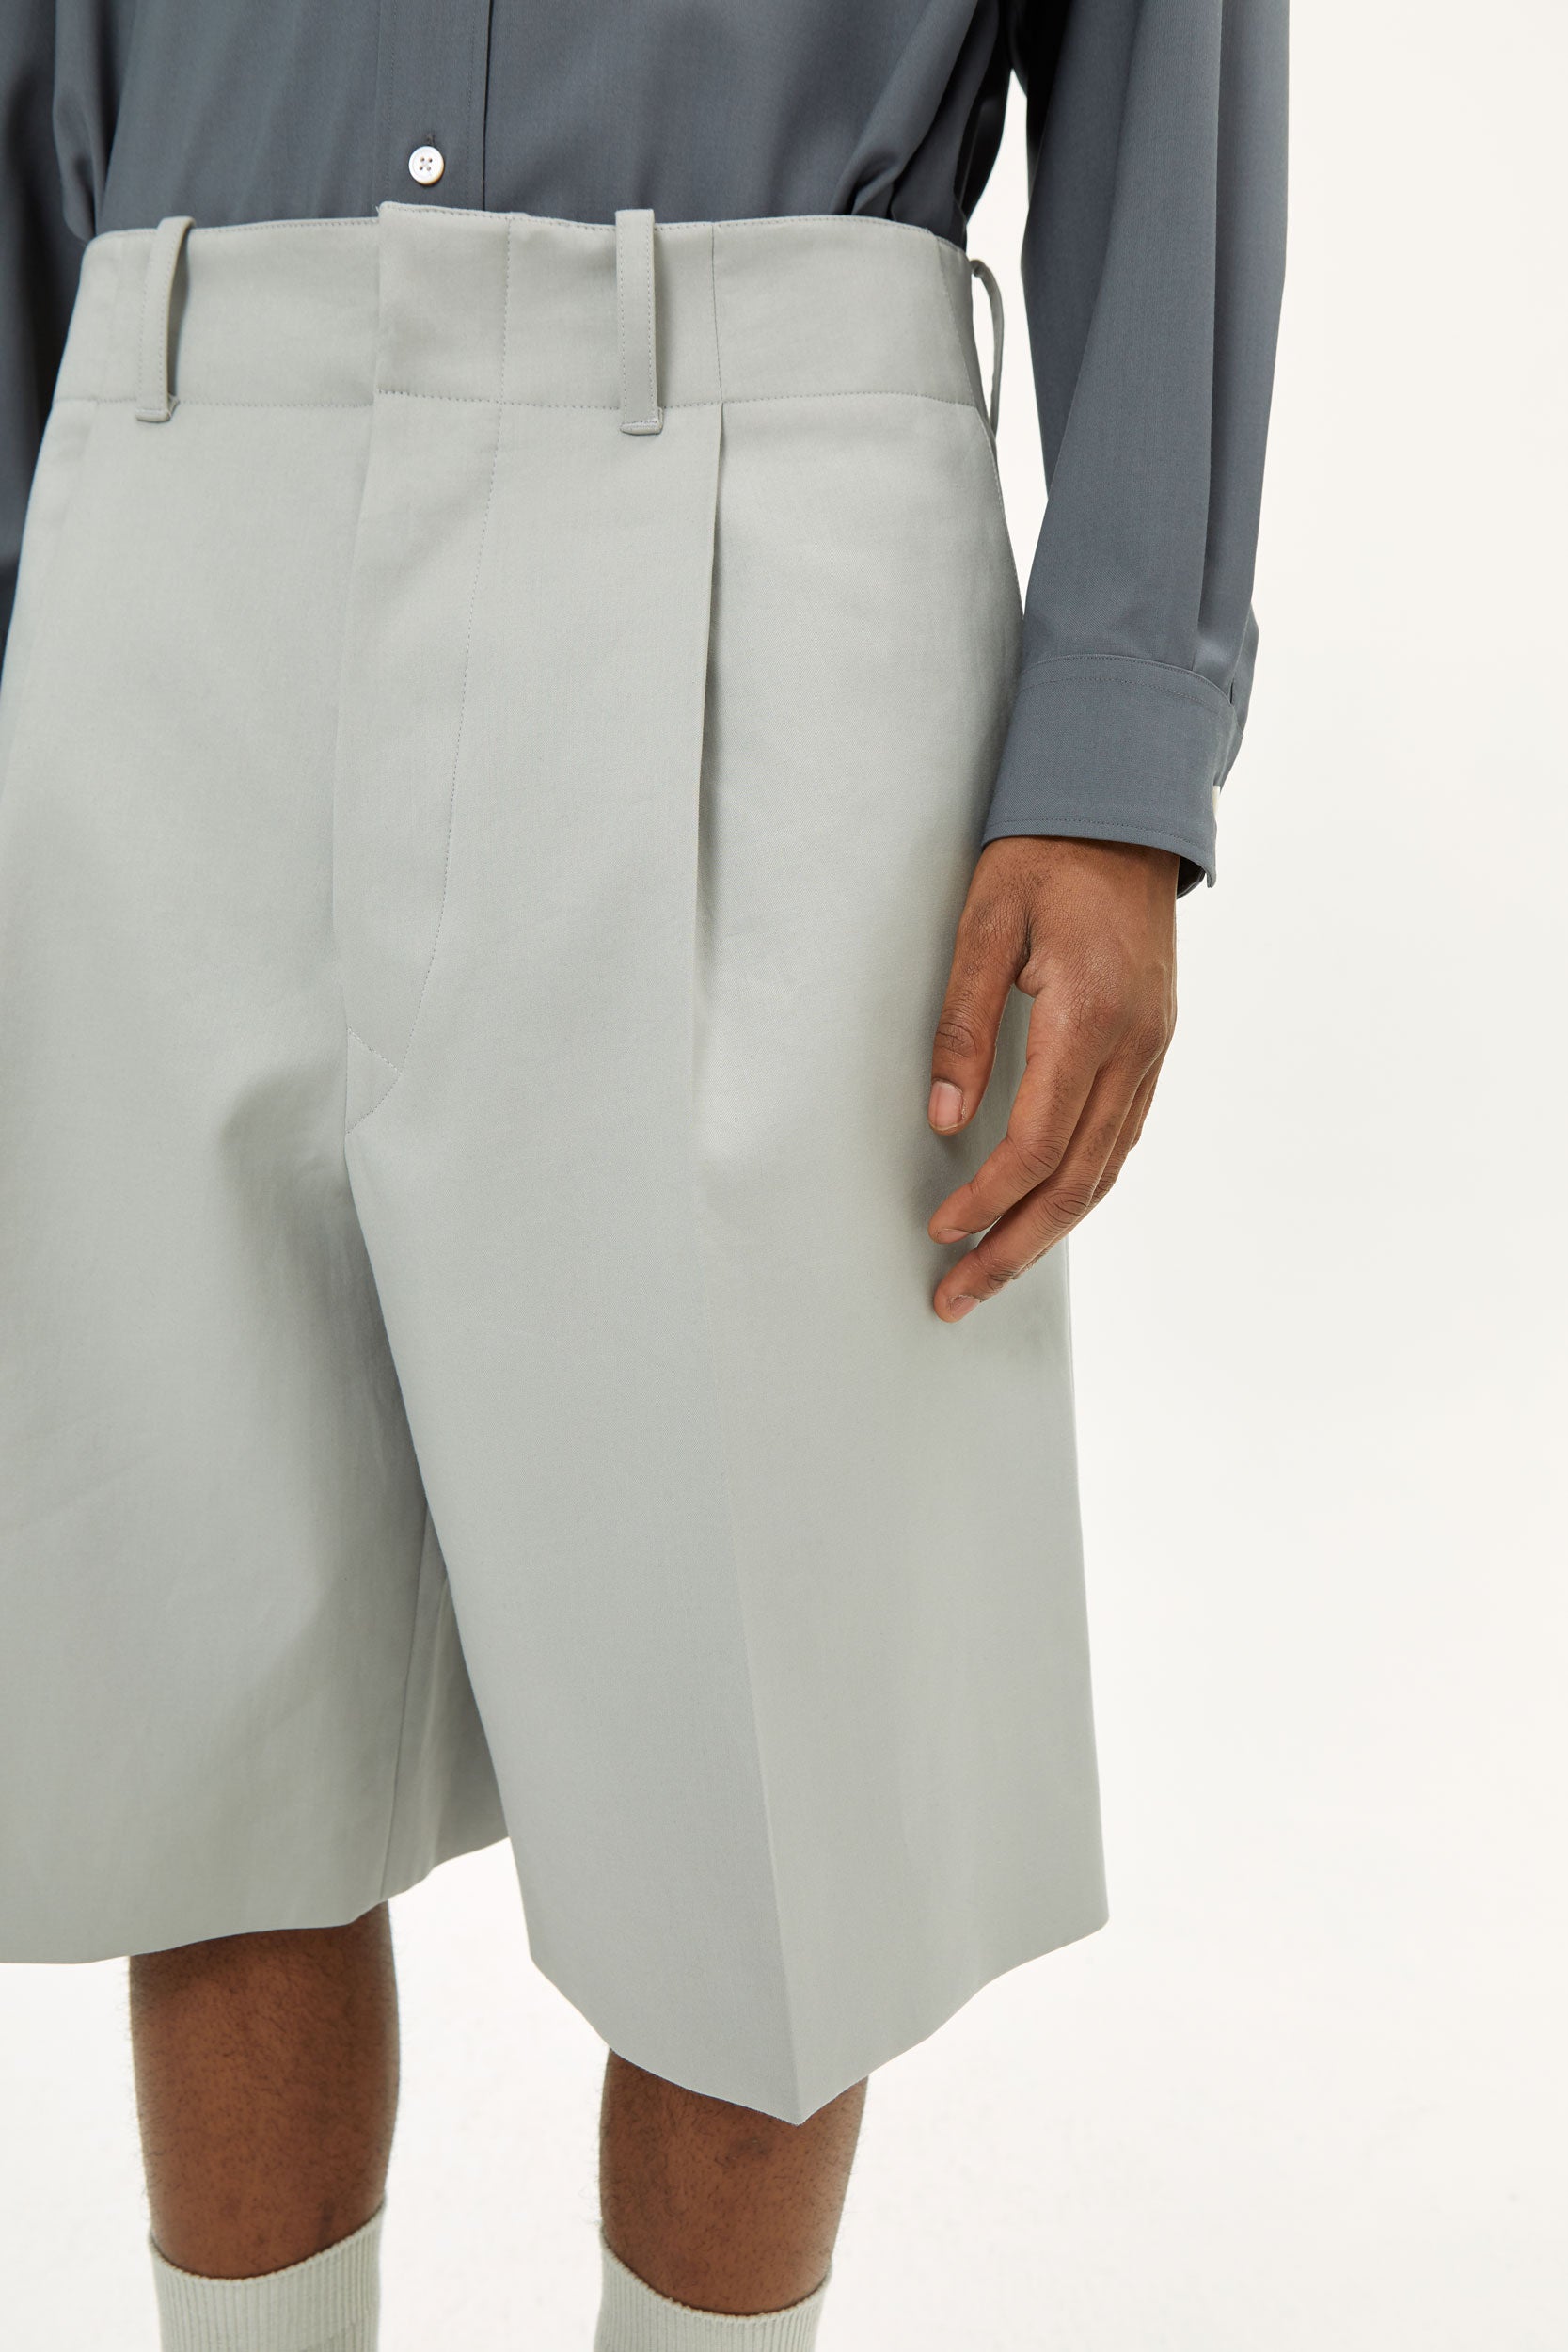 PLEATED WIDE GREY COTTON SHORTS